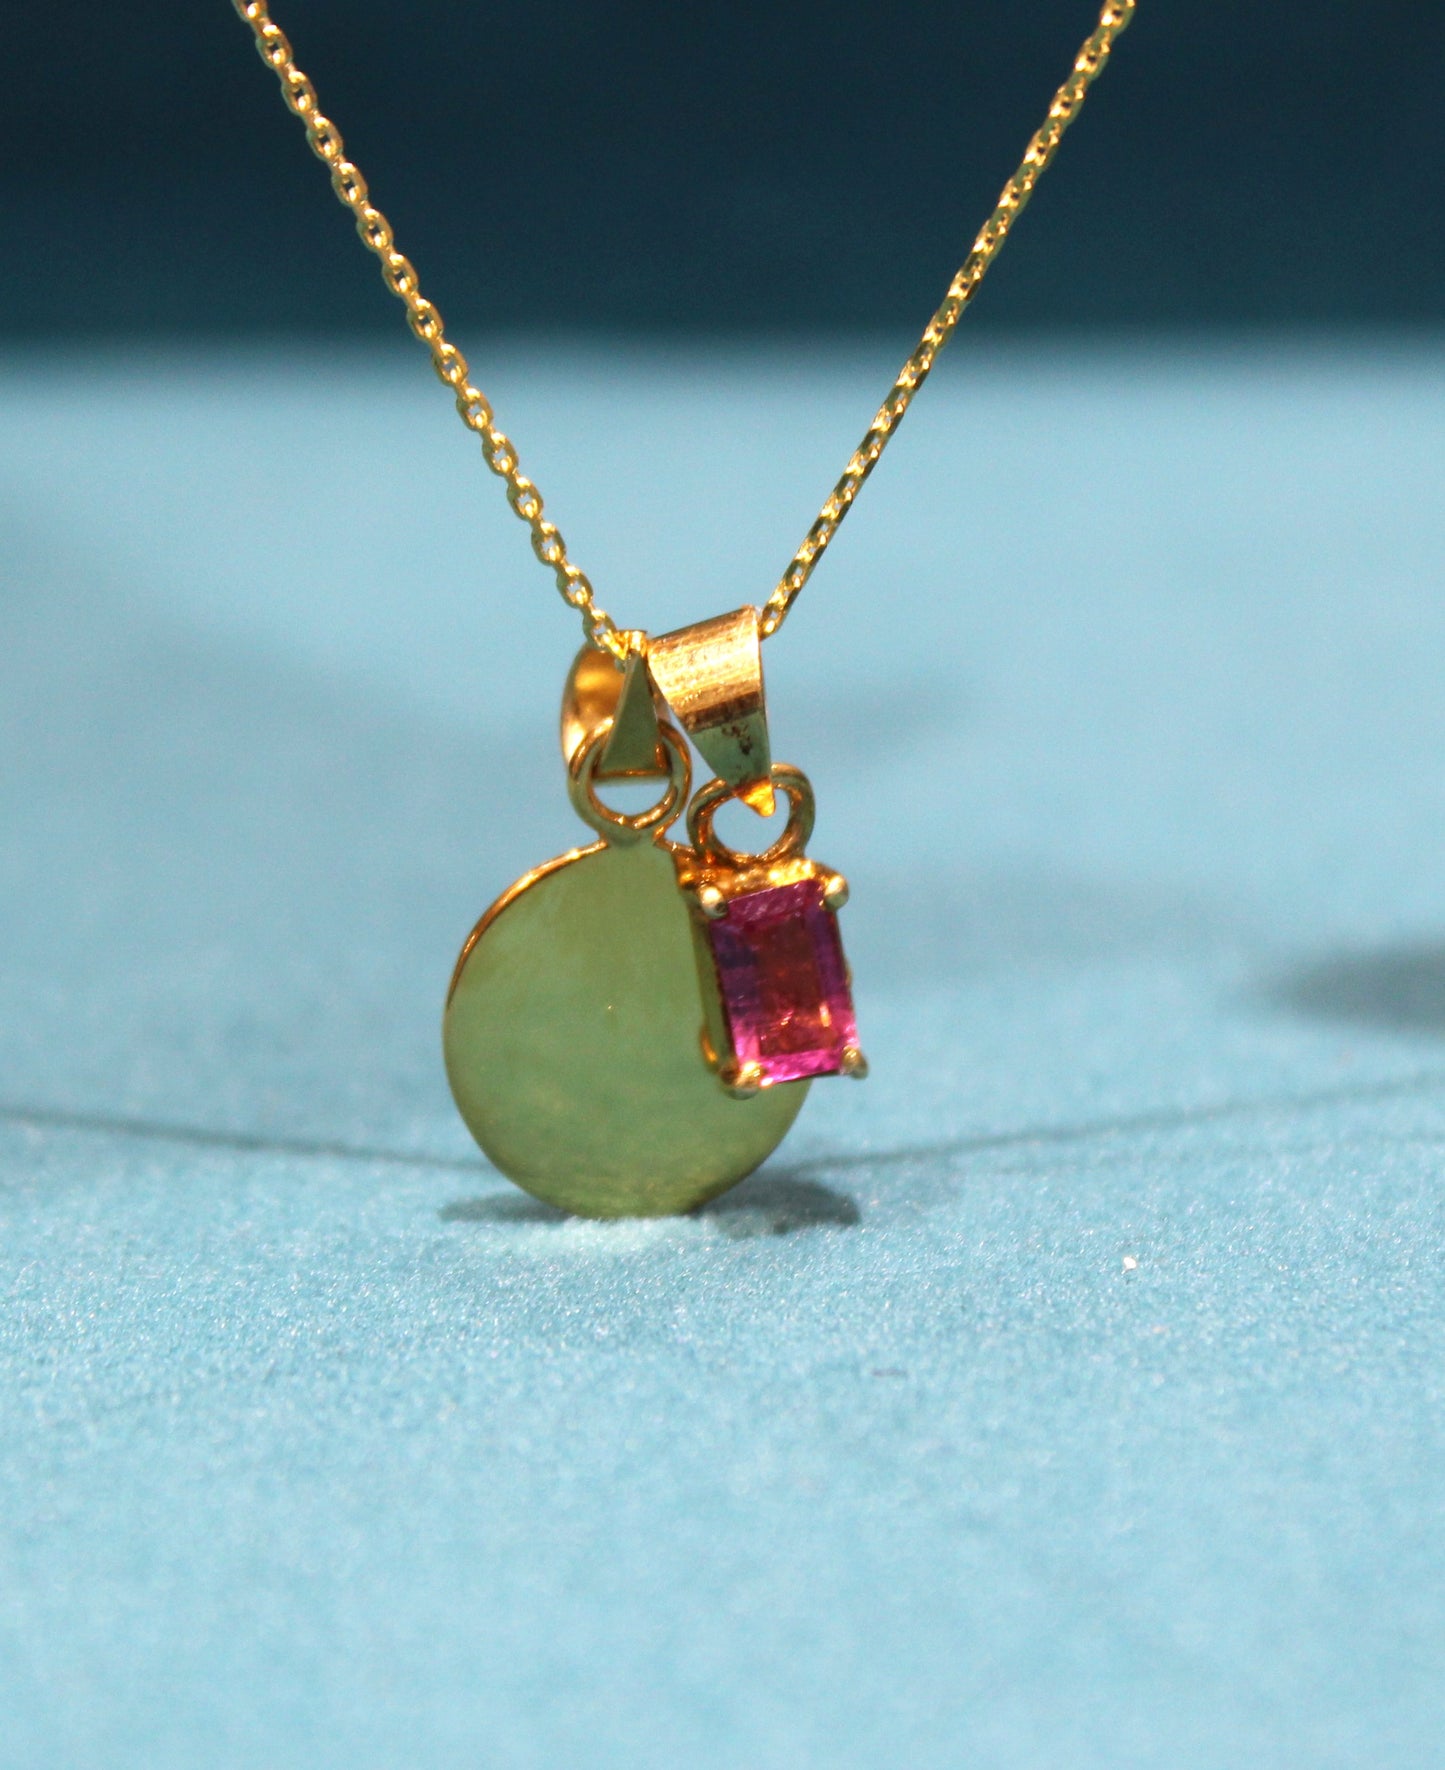 Pink Tourmaline October Birthstone with Initial Pendant and Chain